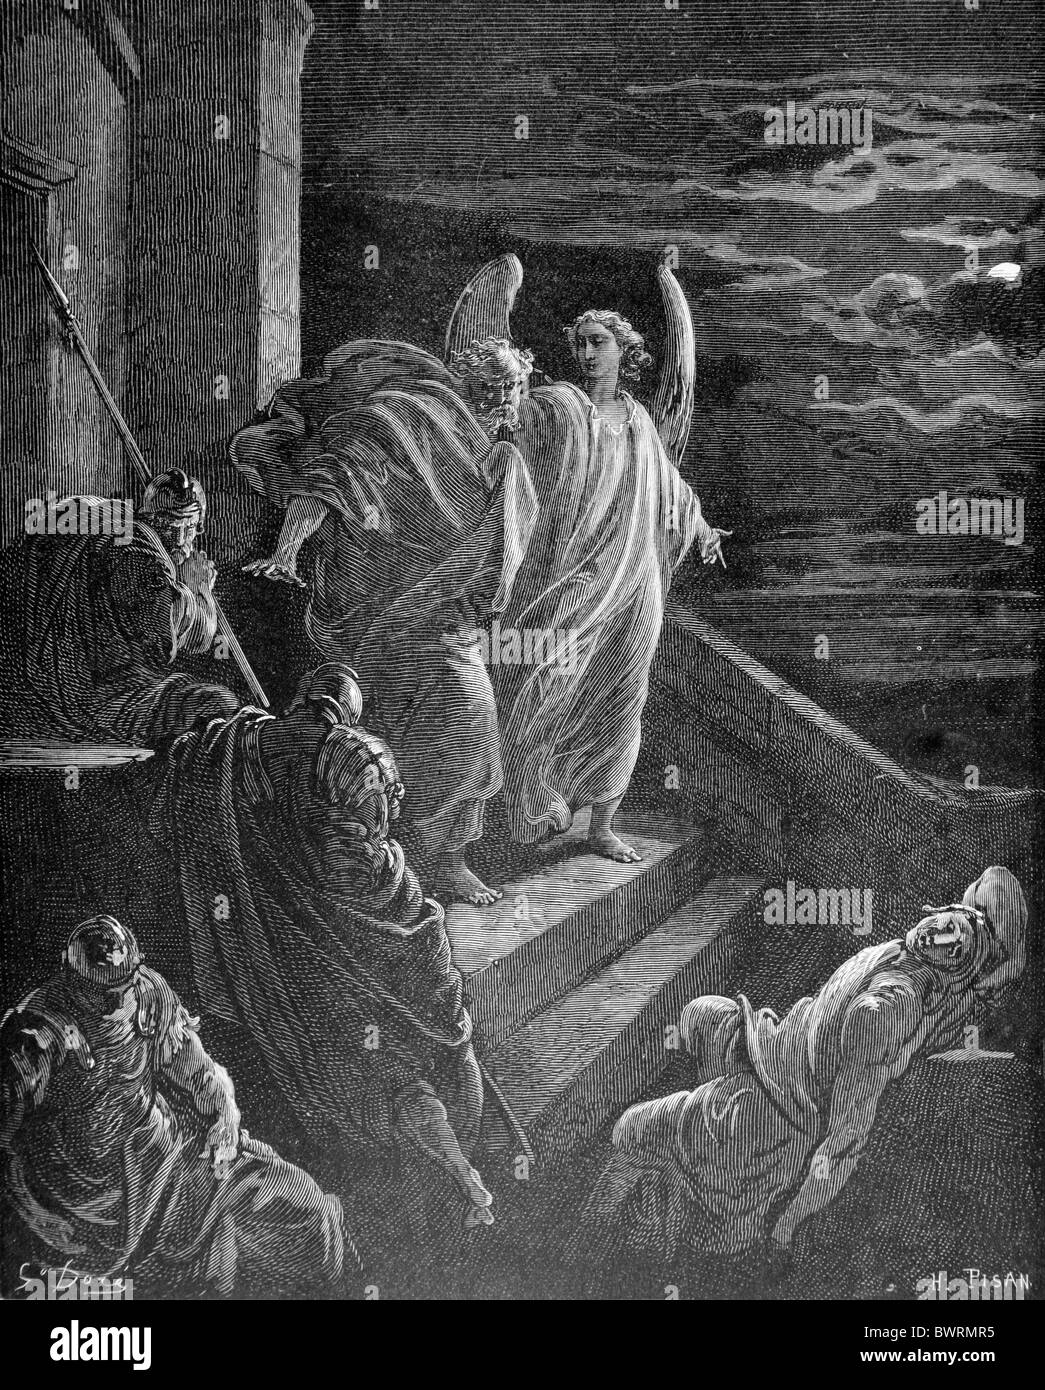 Gustave Doré; Saint Peter delivered from Prison; Black and White Engraving Stock Photo